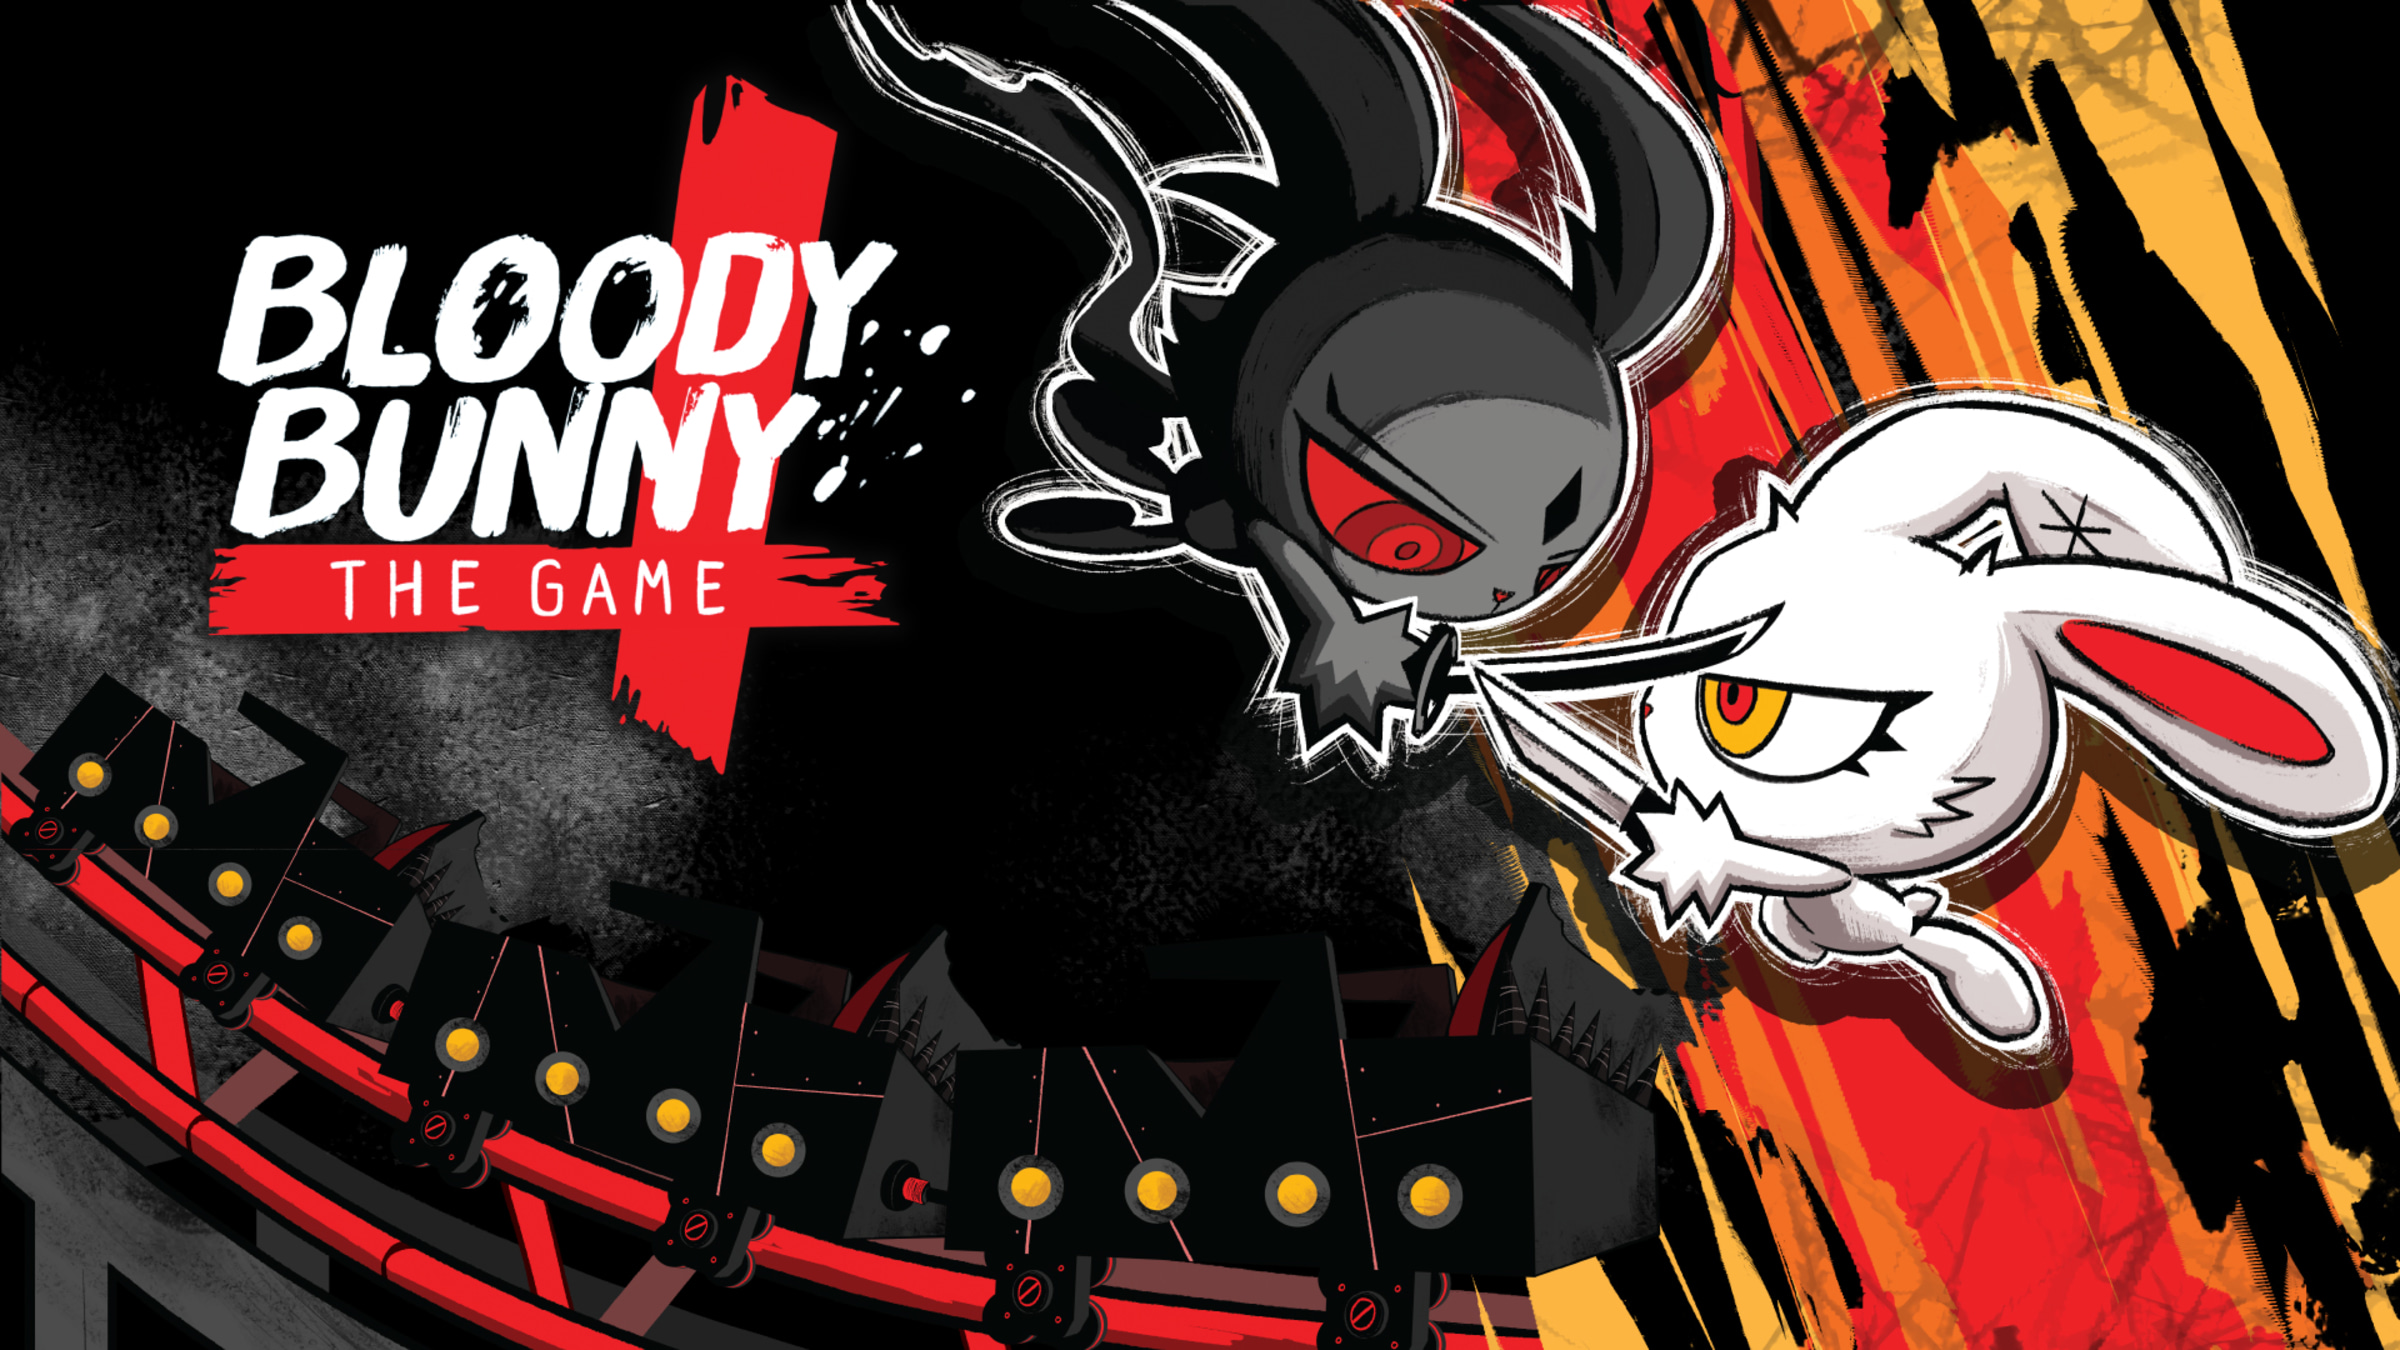 Bloody Bunny, The Game for Nintendo Switch